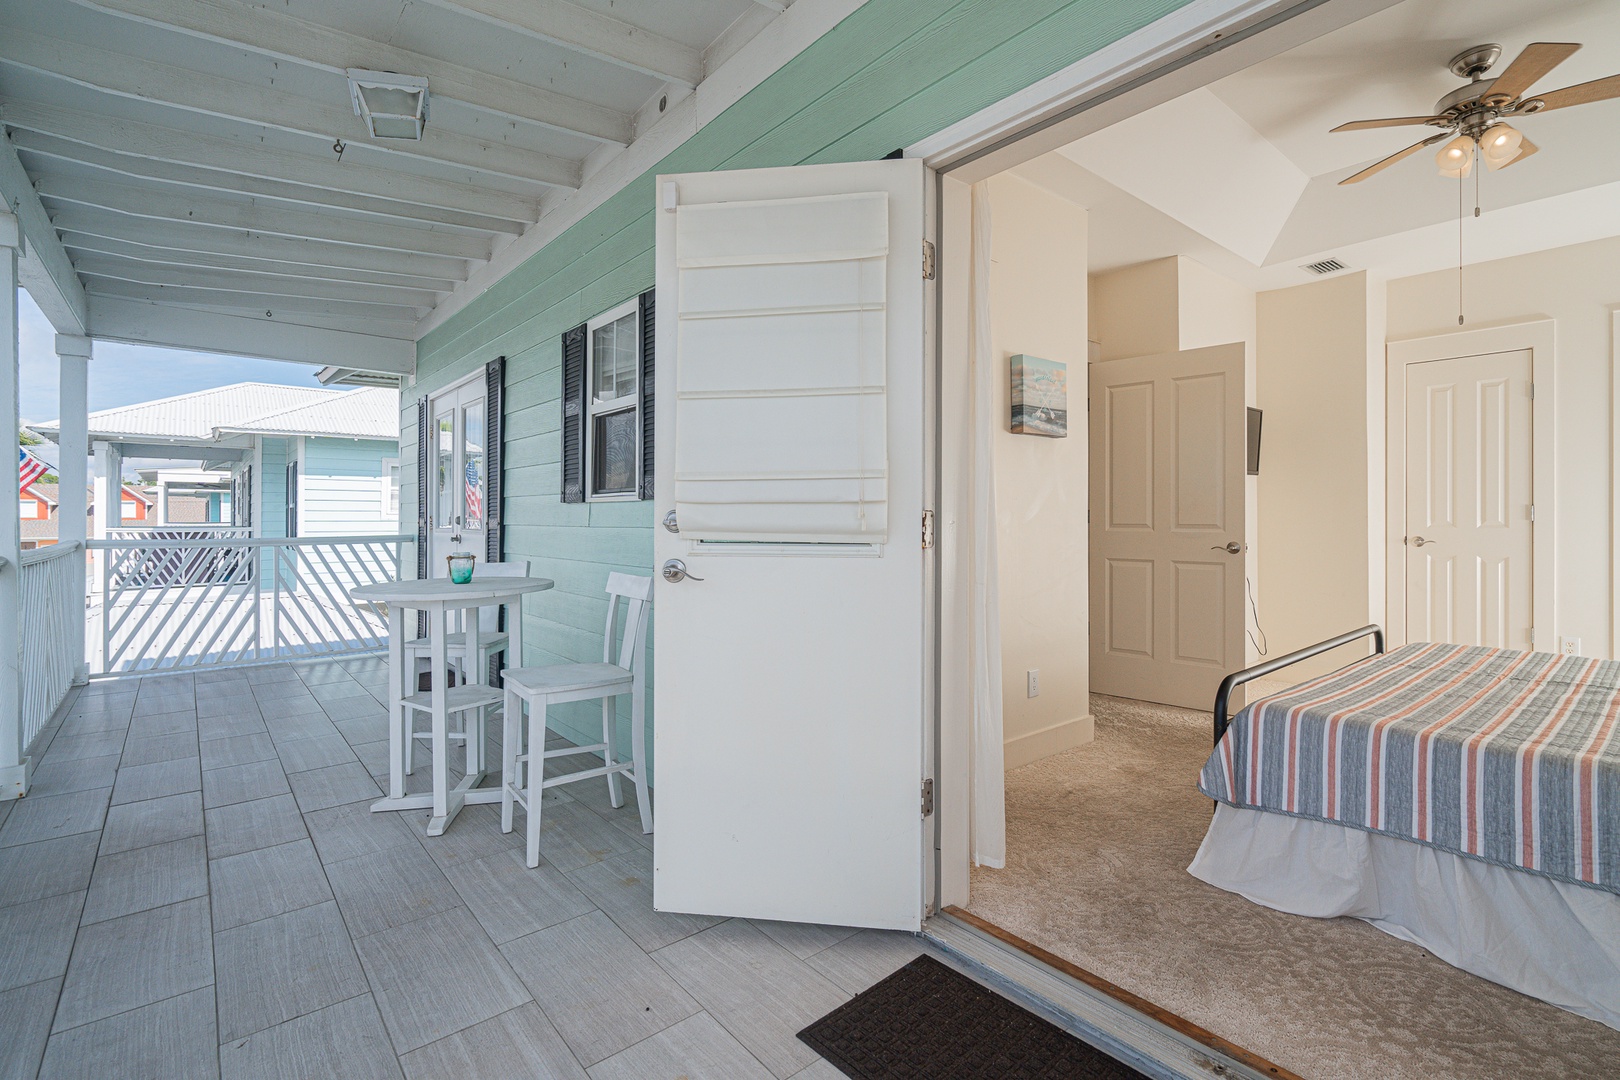 Step out onto the 2nd floor deck & take in the fresh air